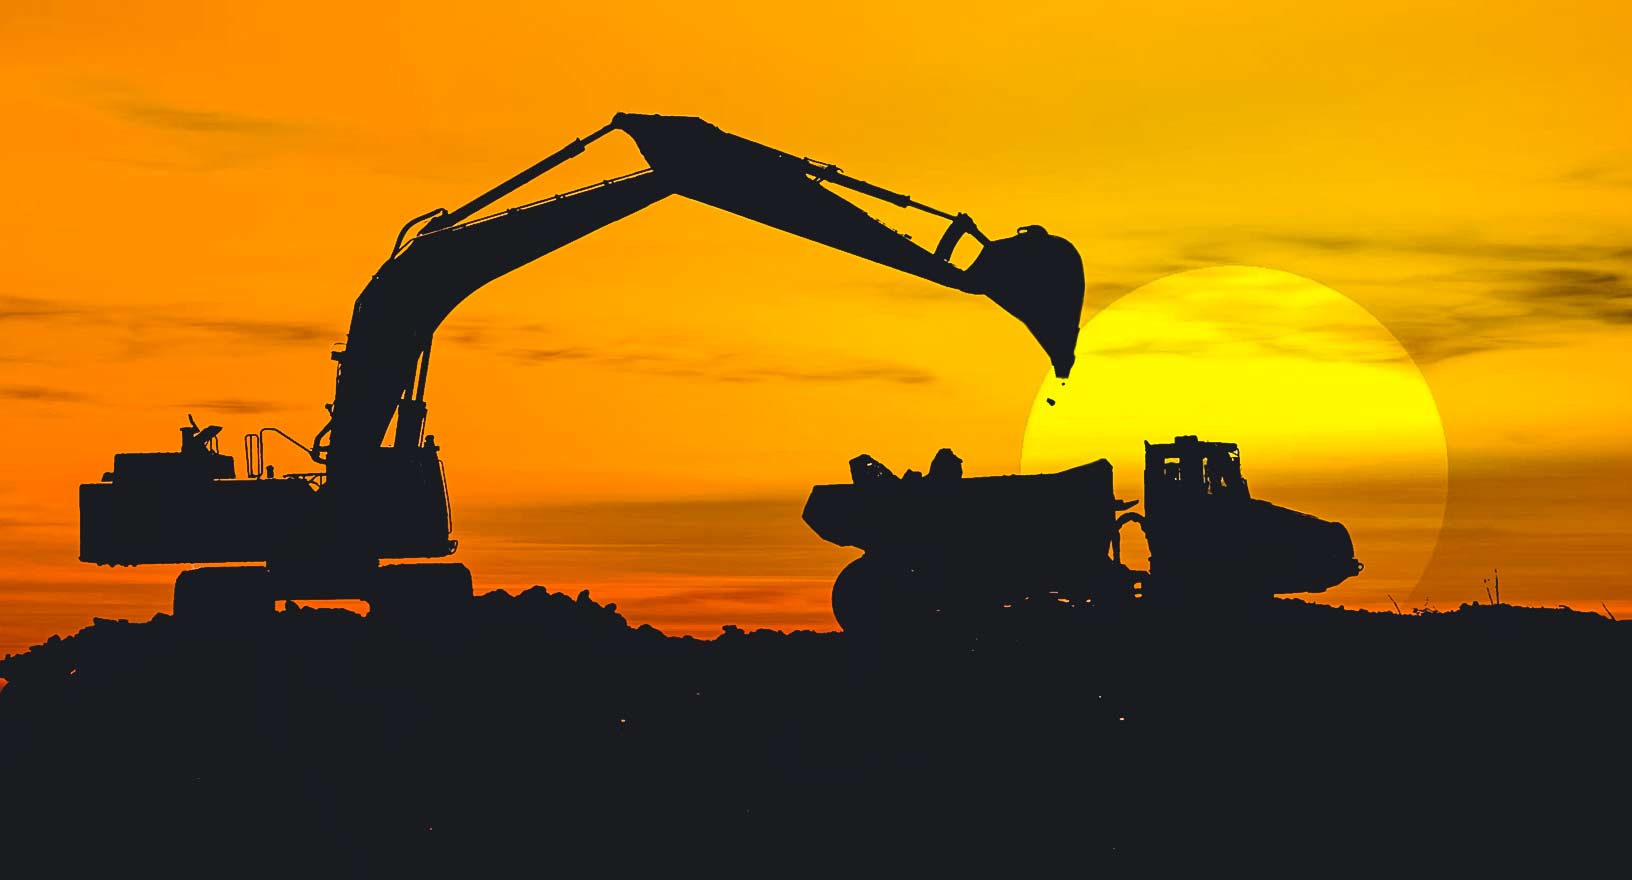 Silhouette of digger filling truck at sunset on construction site 